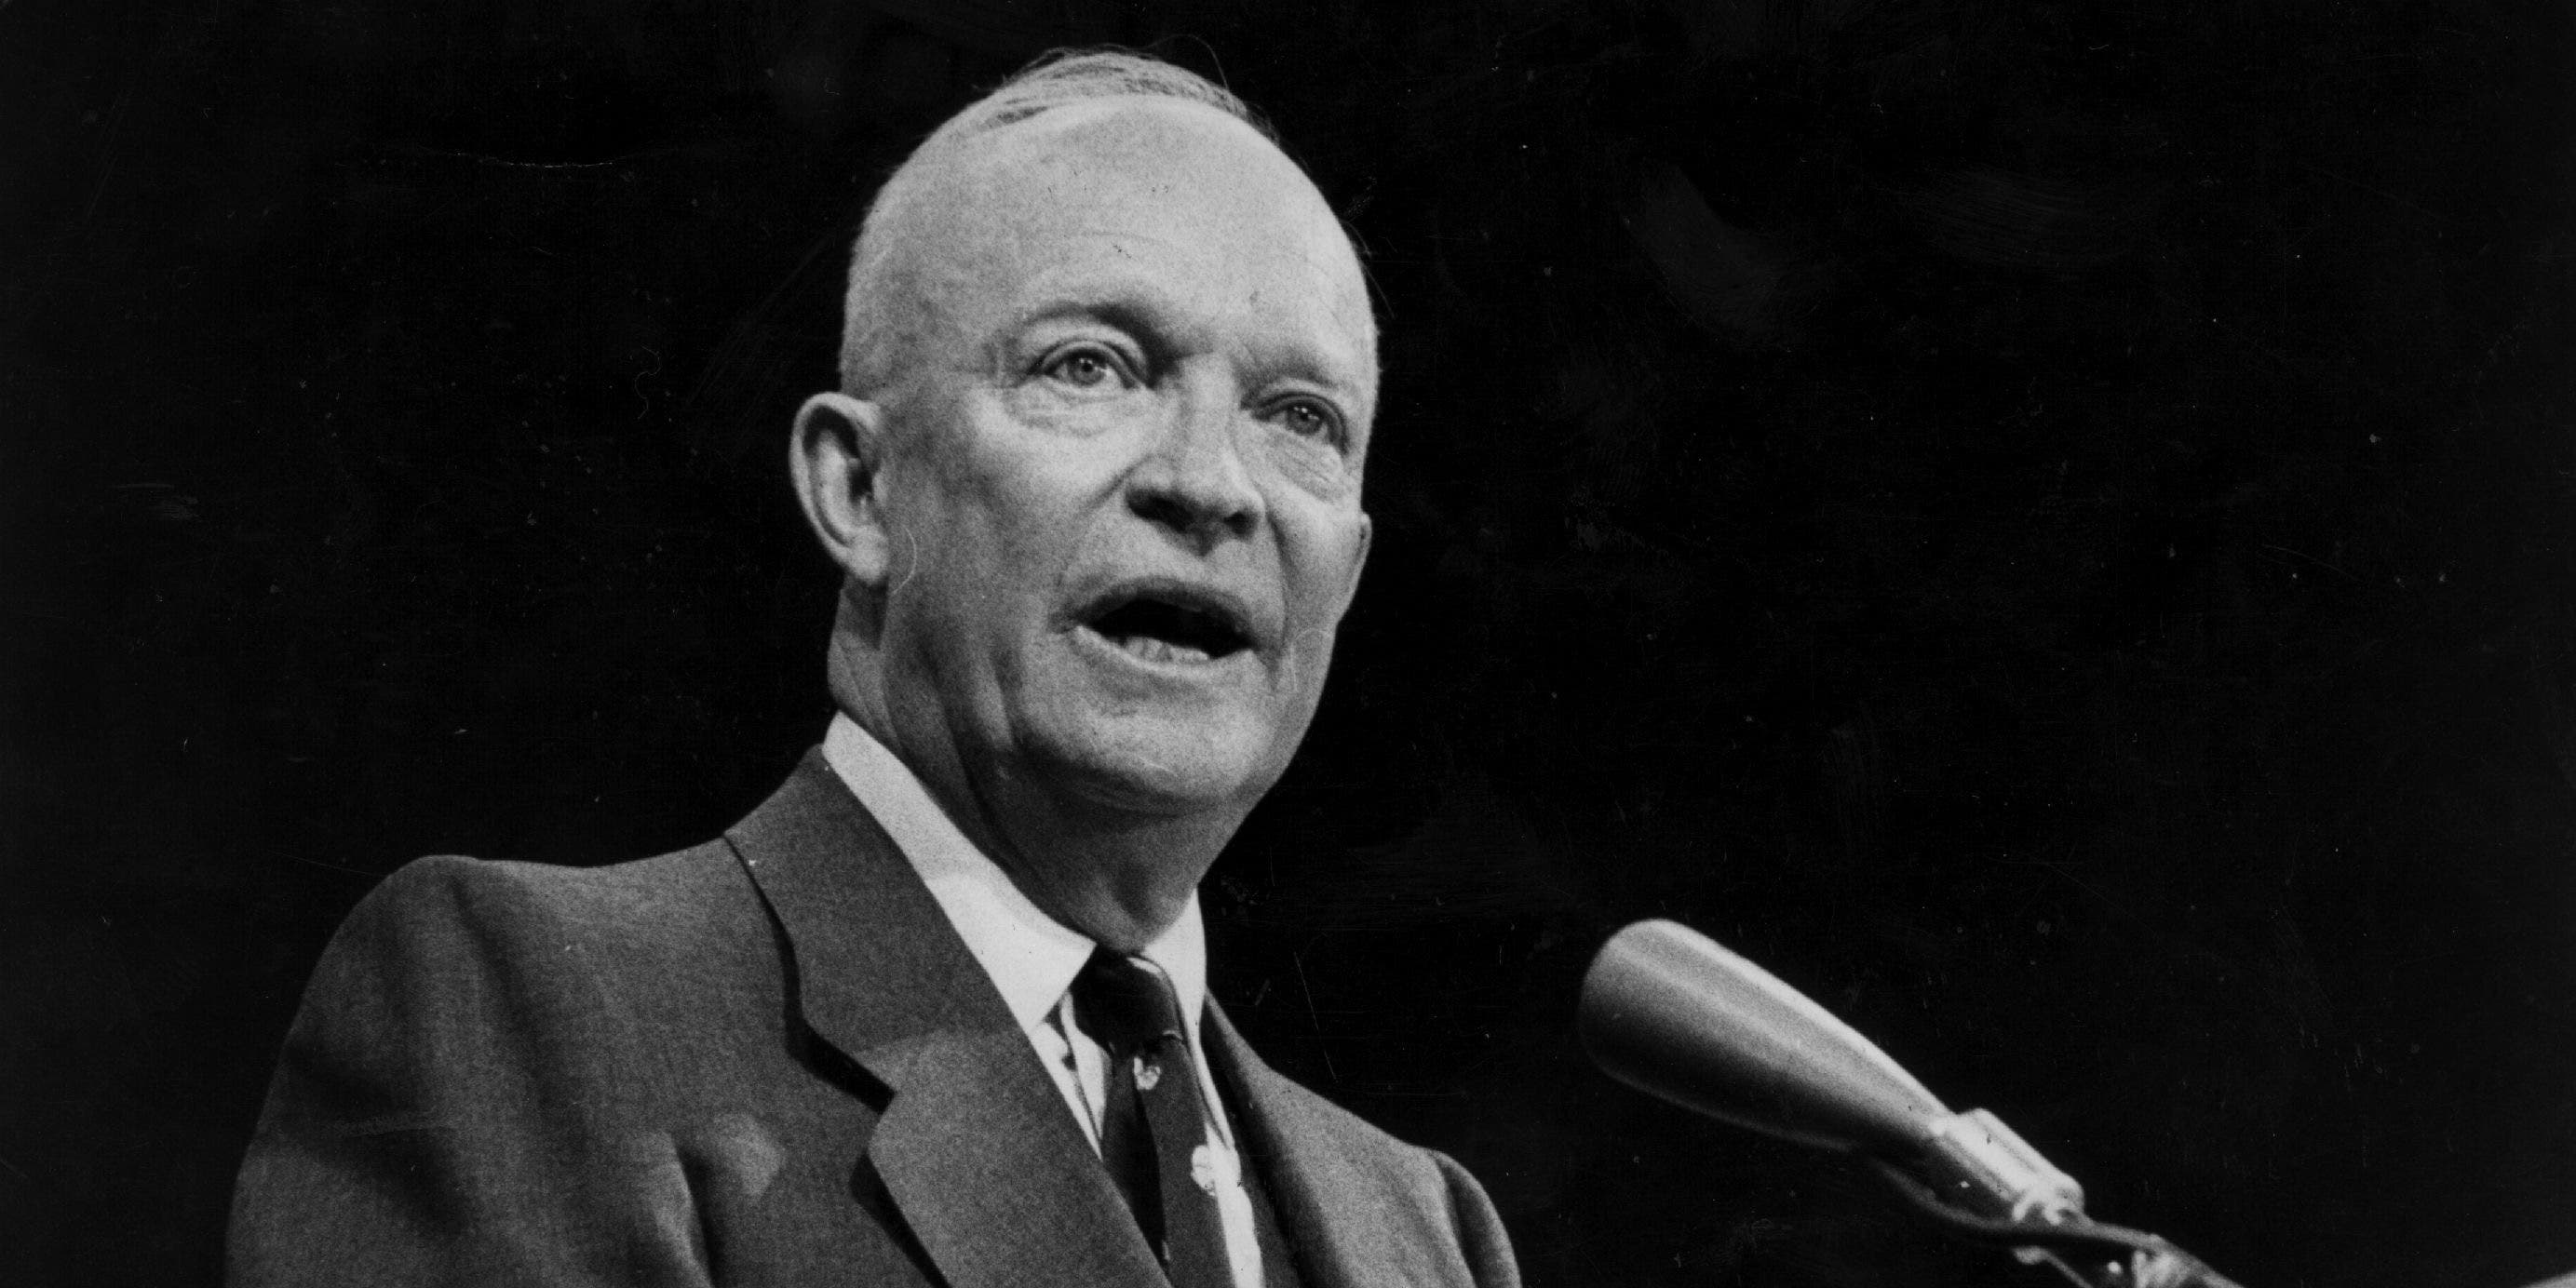 Dwight D Eisenhower (1890 - 1969) the 34th President of the United States of America. Original Publication: Picture Post - 8718 - They Still Like Ike - pub. 1956